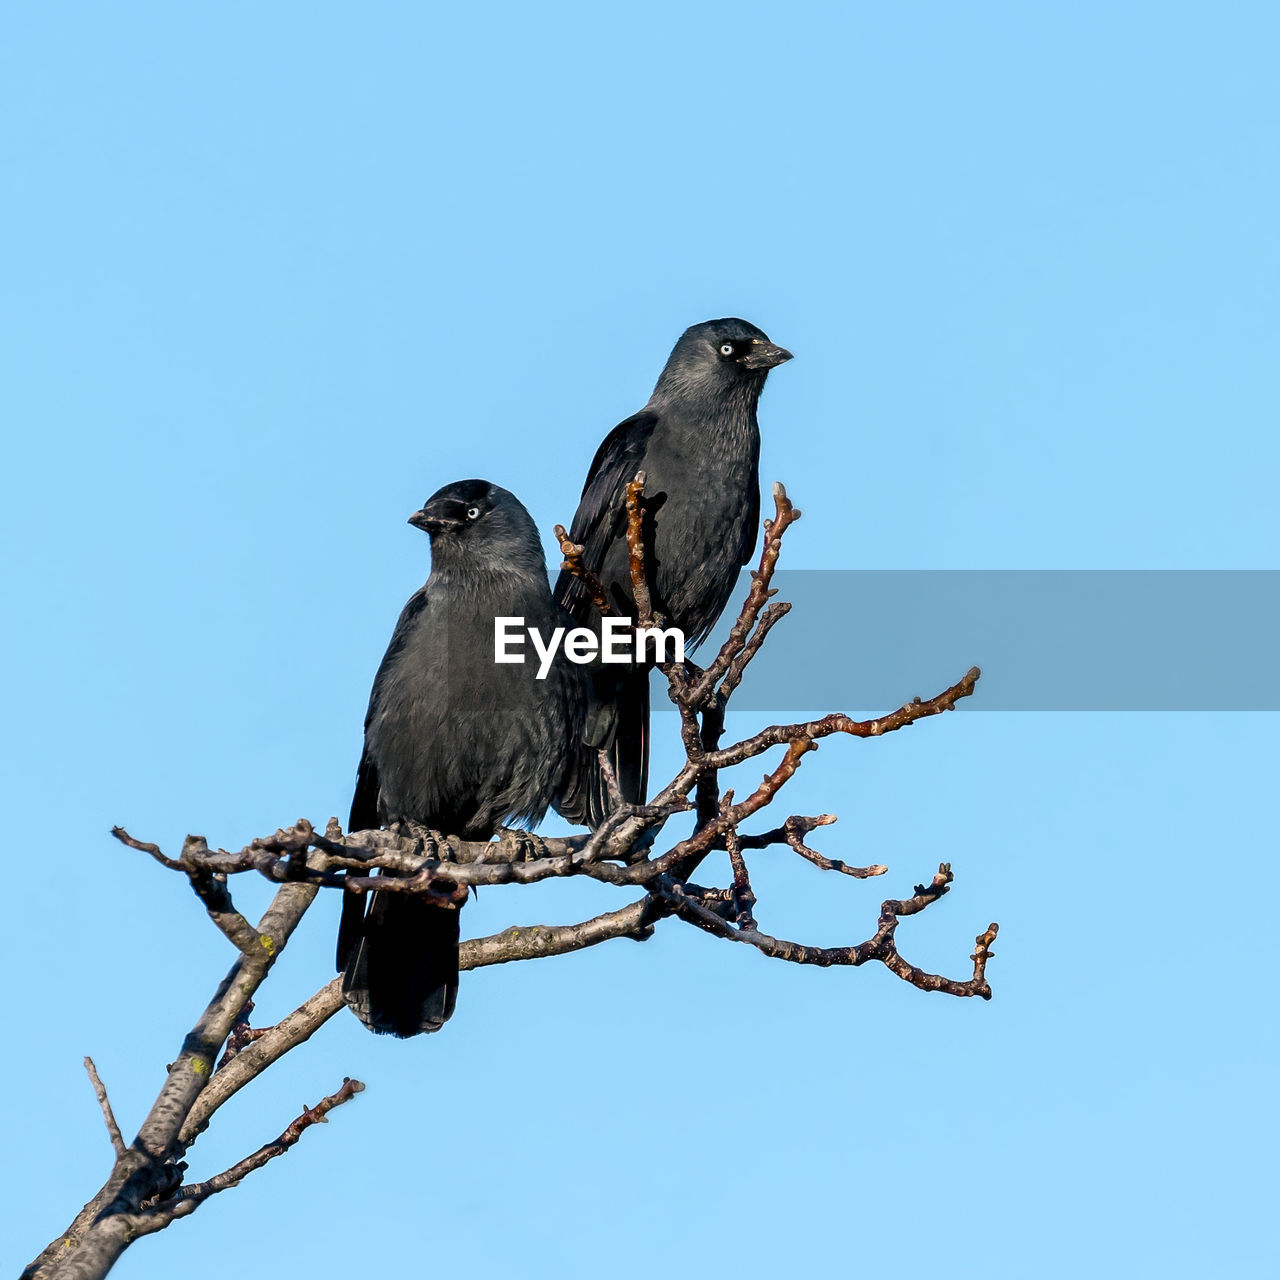 Two black jackdaws sit on a branch against a blue sky